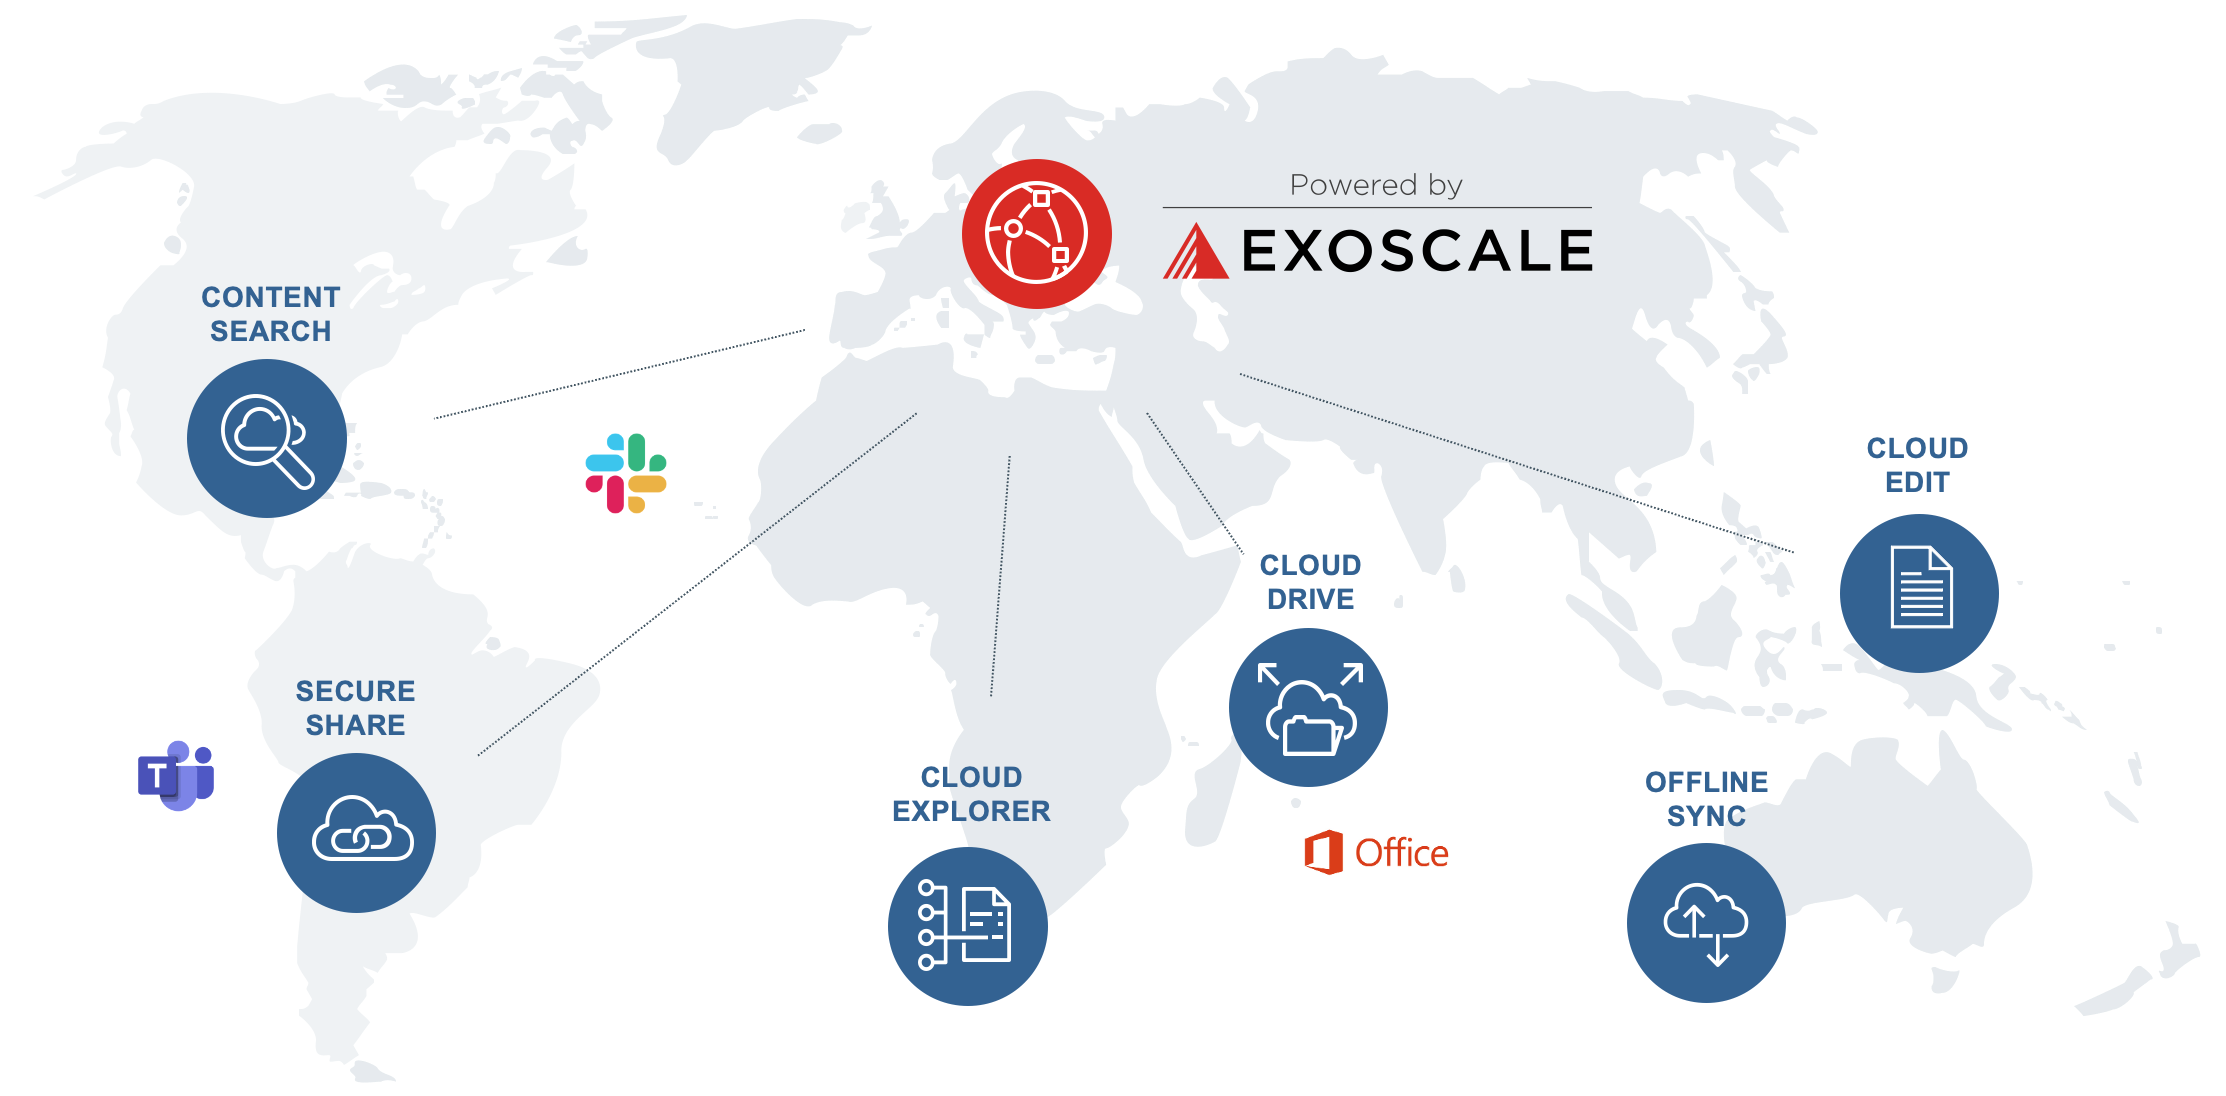 Exoscale and Storage Made Easy Offer Secure Data Management Solution, the Enterprise File Fabric, for the Exoscale Cloud